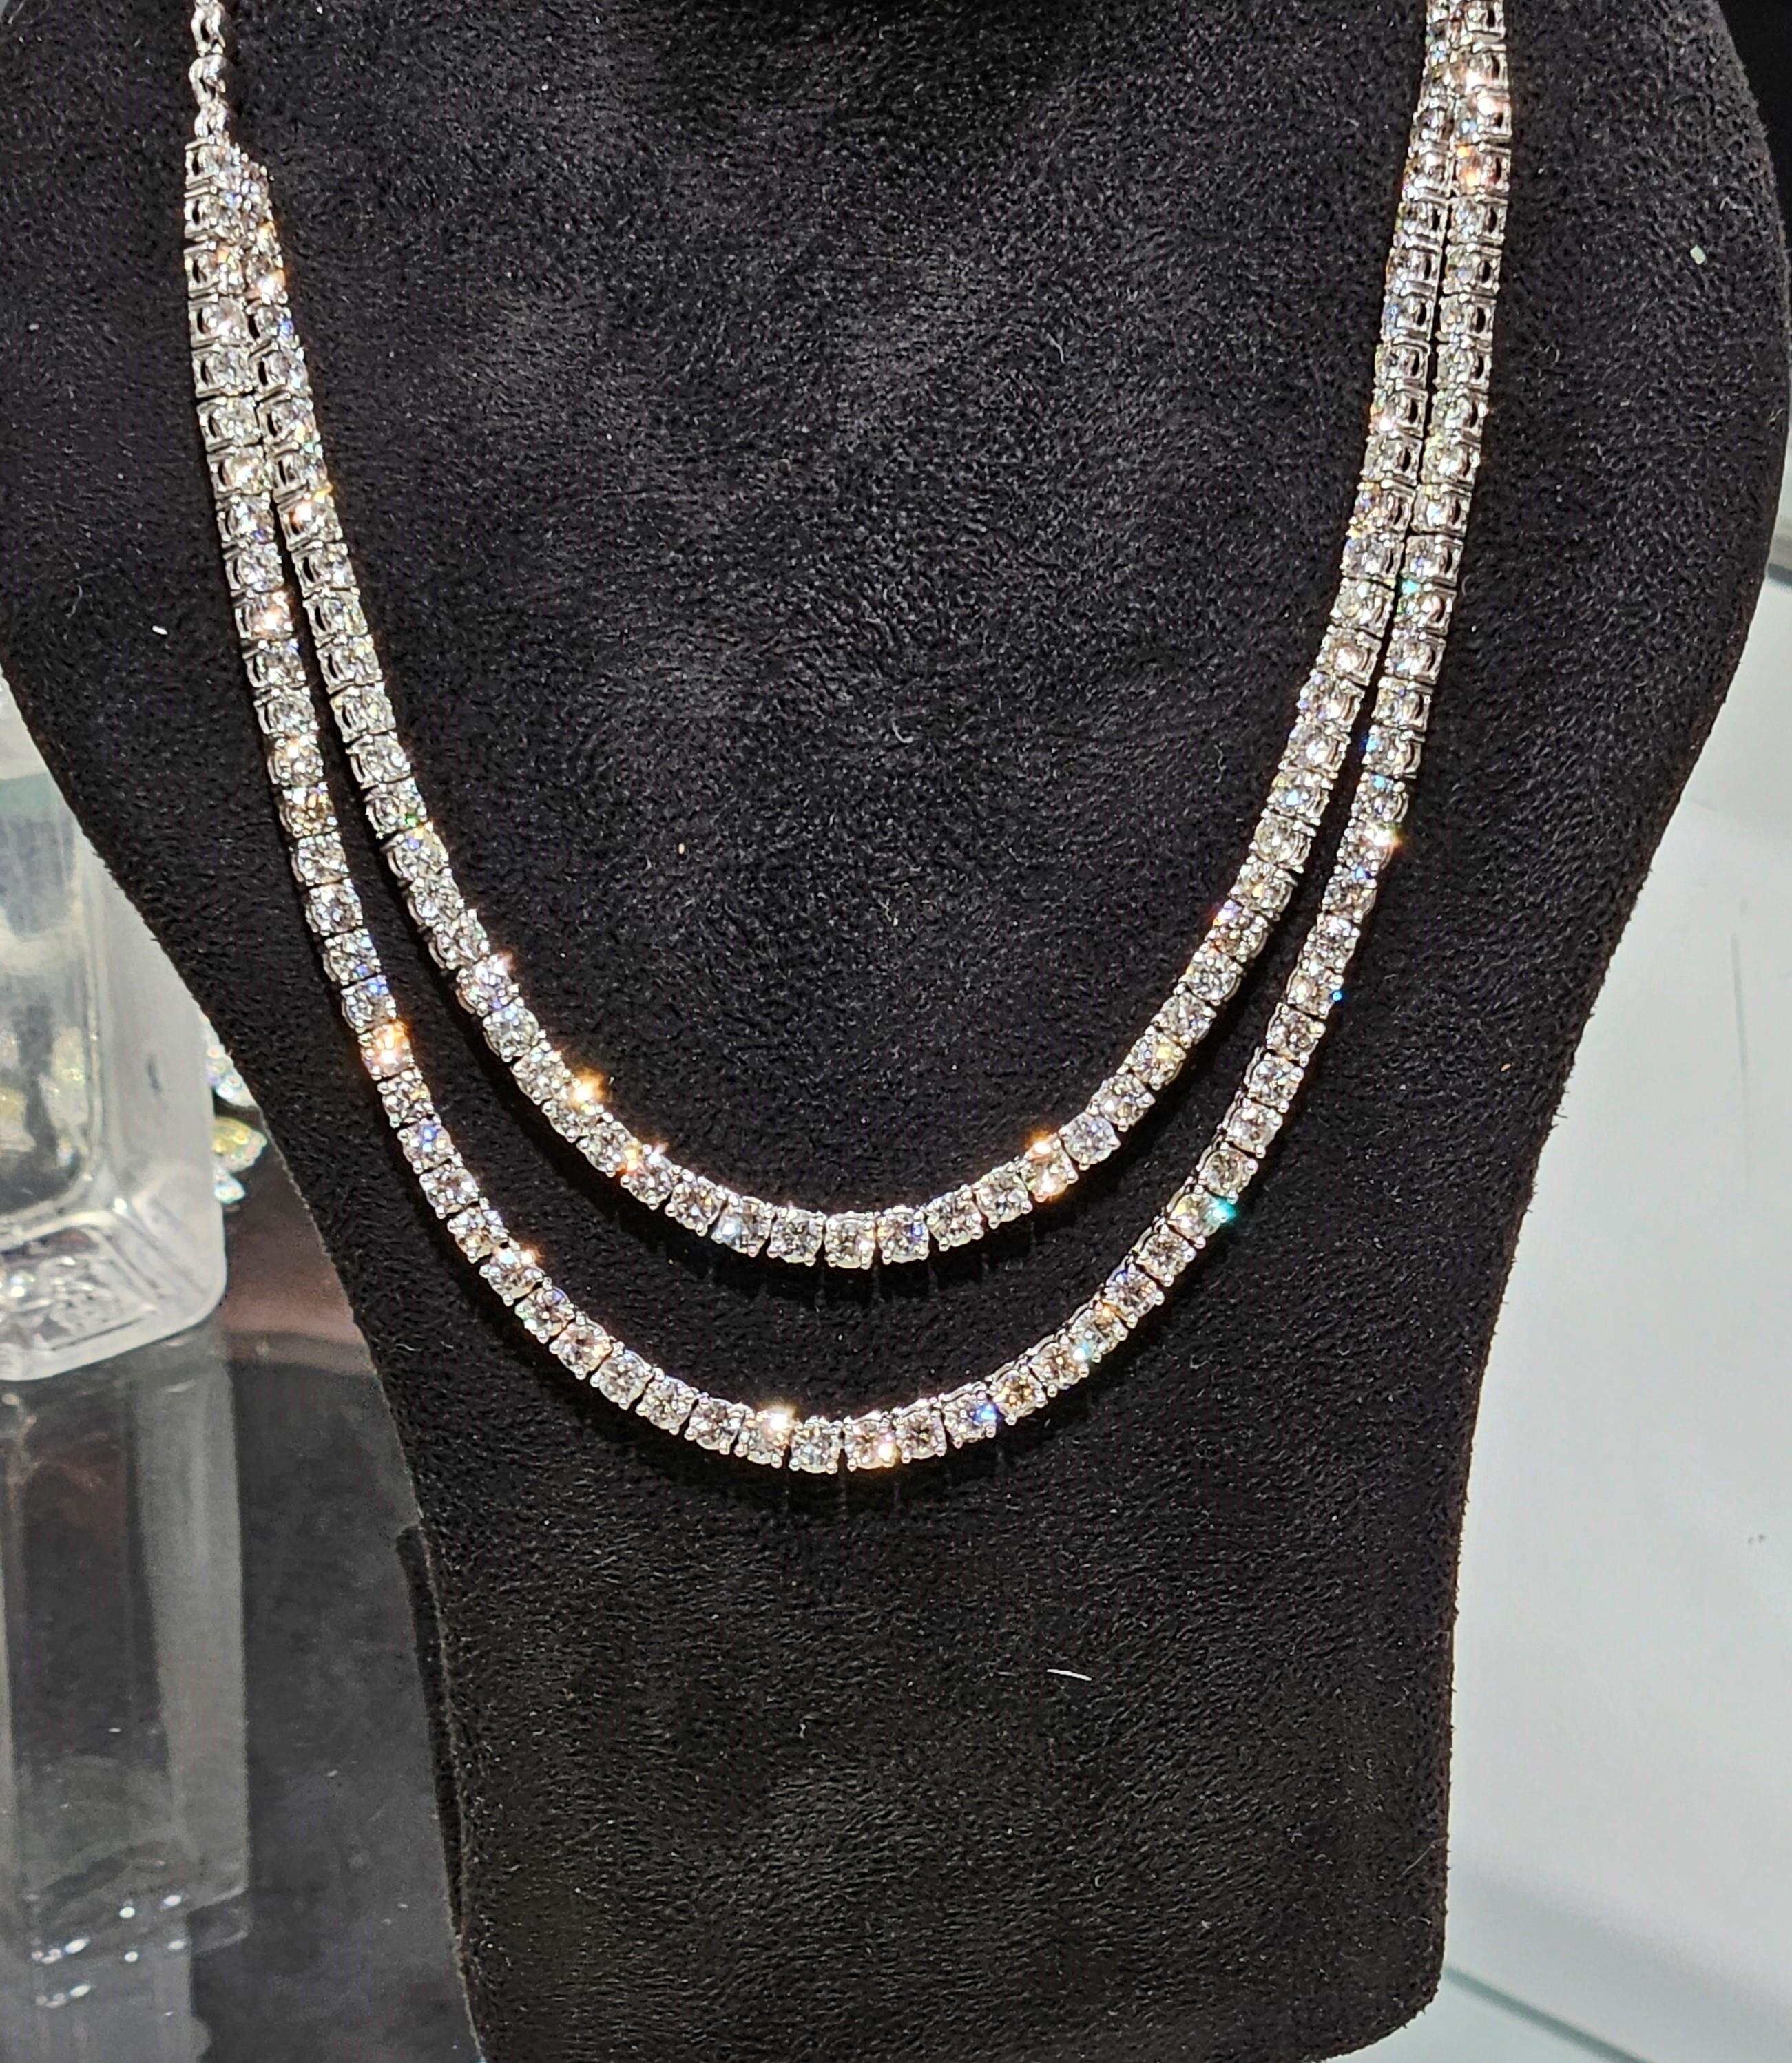 The Following Item we are offering is this Rare Important Radiant 18KT Gold Gorgeous Glittering and Sparkling Magnificent Fancy Double Strand Diamond Necklace. Necklace contains approx 13CTS of Beautiful Glittering Diamonds all set in 18KT Gold!!!